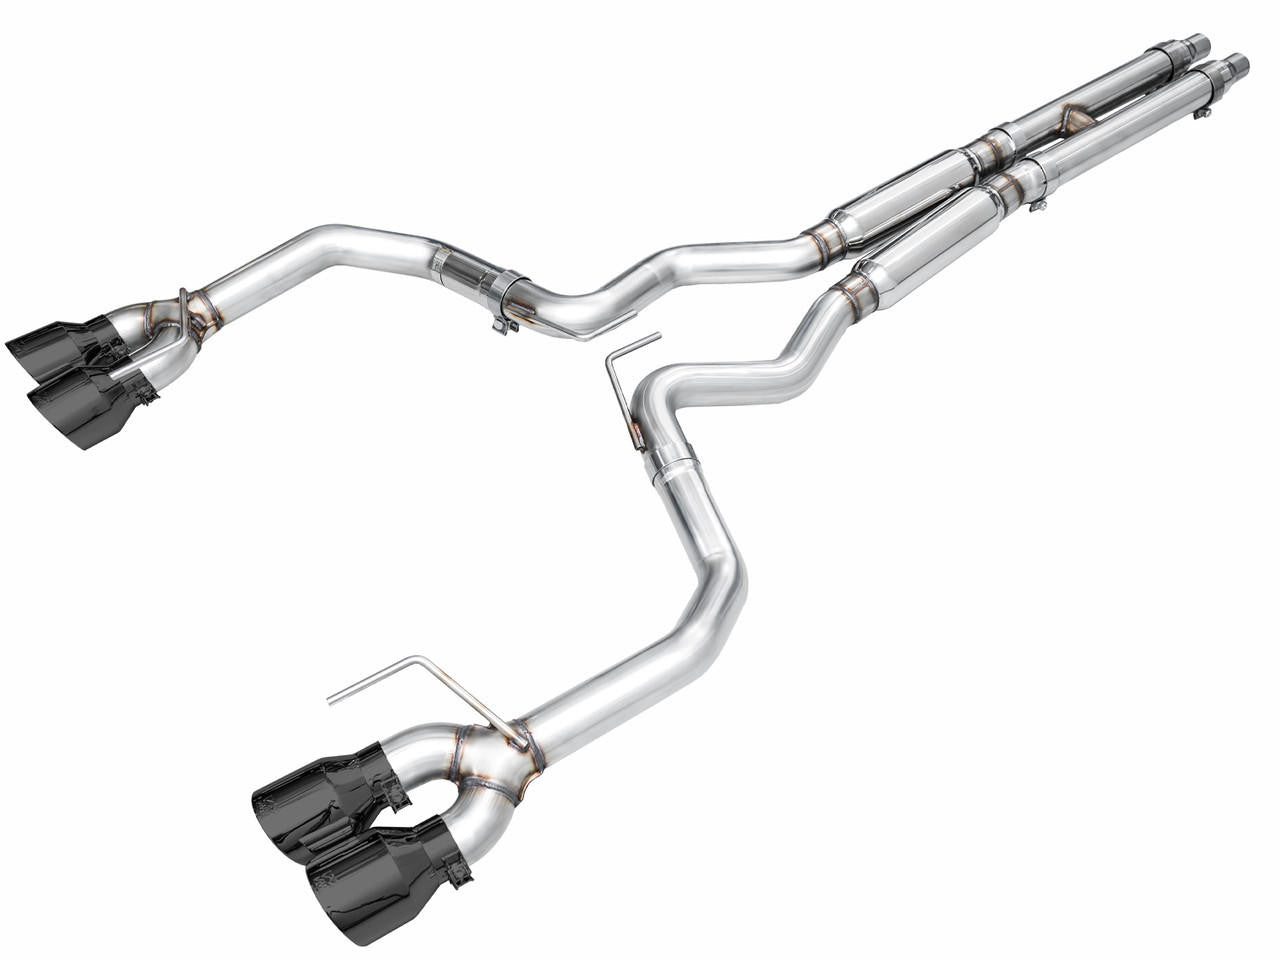 AWE Tuning AWE Track Edition Exhaust for S650 Mustang GT Fastback - Quad Diamond Black Tips 3020-43650 